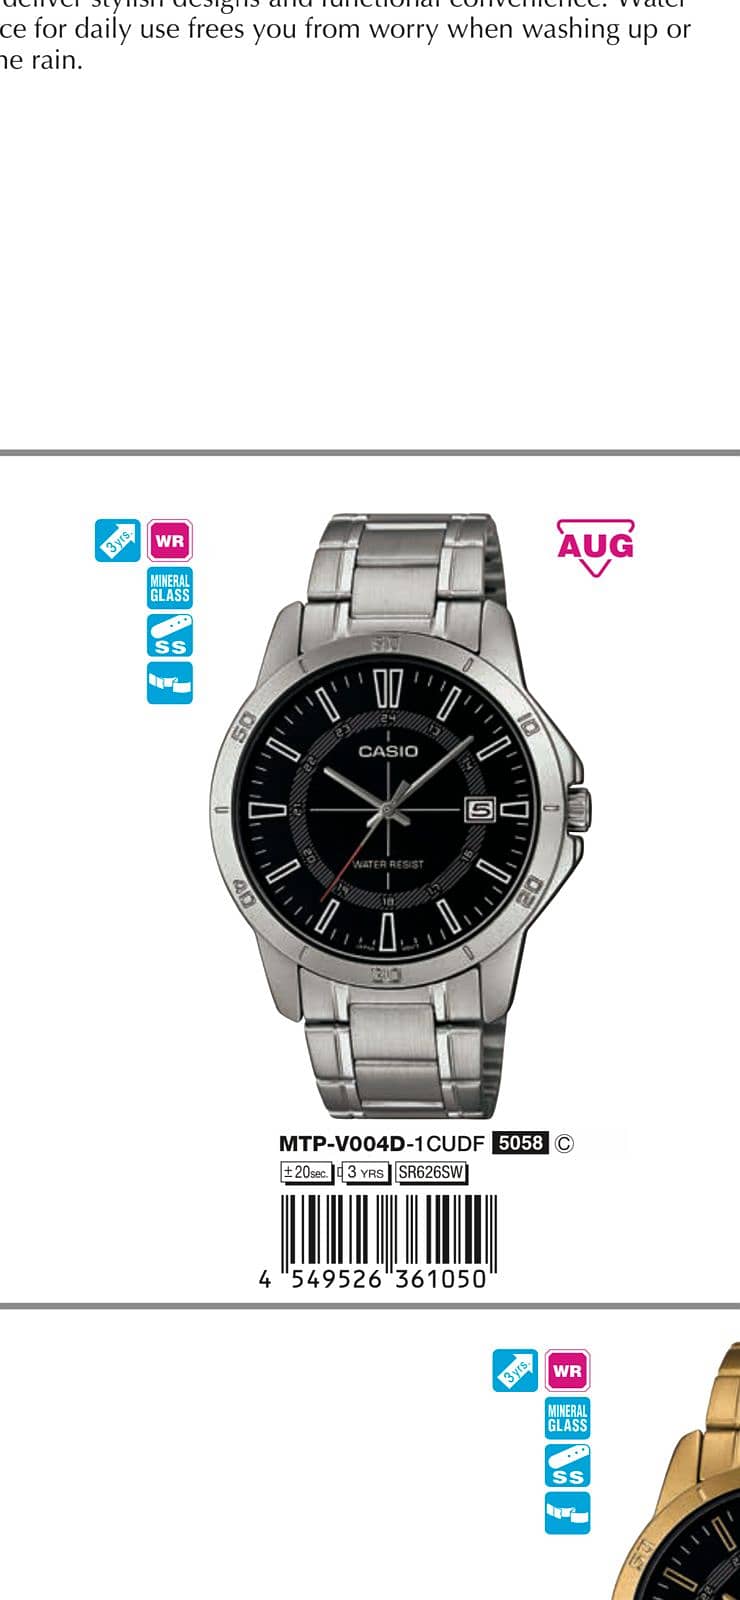 Casio watches on discounted prices 8